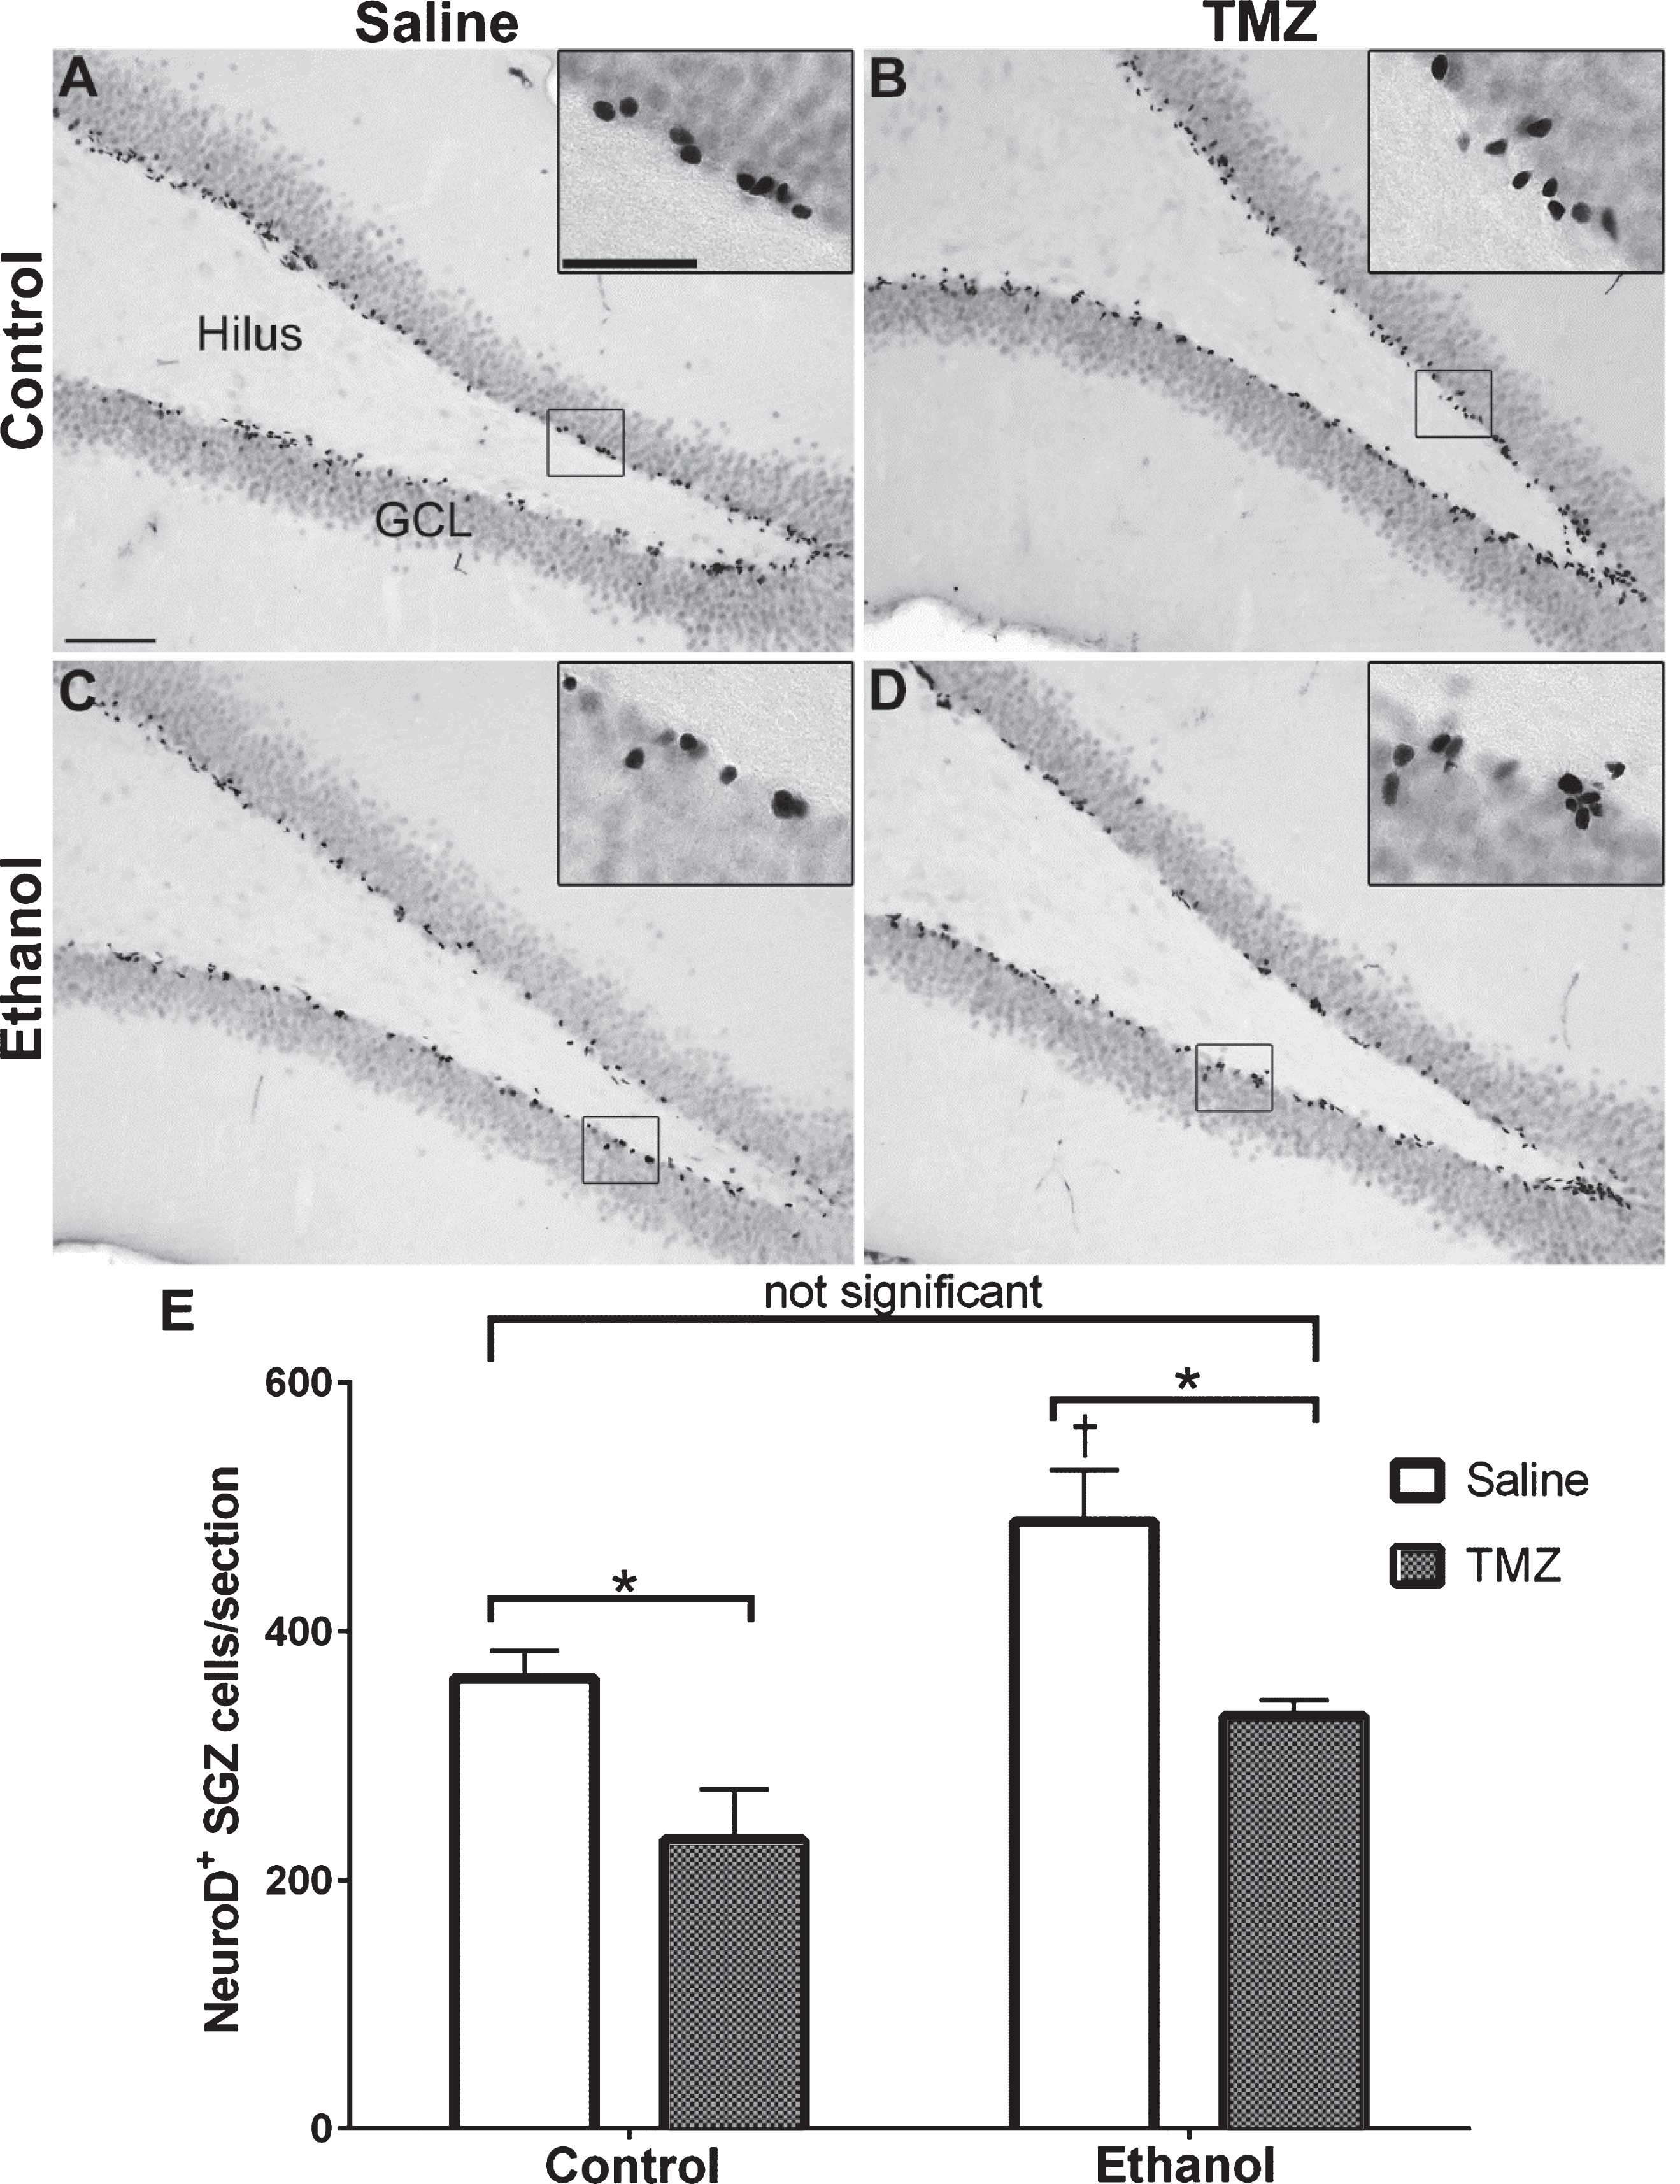 TMZ reduces reactive neurogenesis indicated by NeuroD+ cells. (A-D) Representative images of NeuroD immunoreactivity at T14 are shown for (A, B) control and (C, D) EtOH following saline or TMZ (50 mg/kg). (E) Data are the number of NeuroD+ cells in the subgranular zone with error bars reflecting SEM. *p < 0.05; †p < 0.05 control-saline vs. ethanol-saline; n = 8/group. GCL = granule cell layer. Scale bar = 100μm; inset = 40μm.